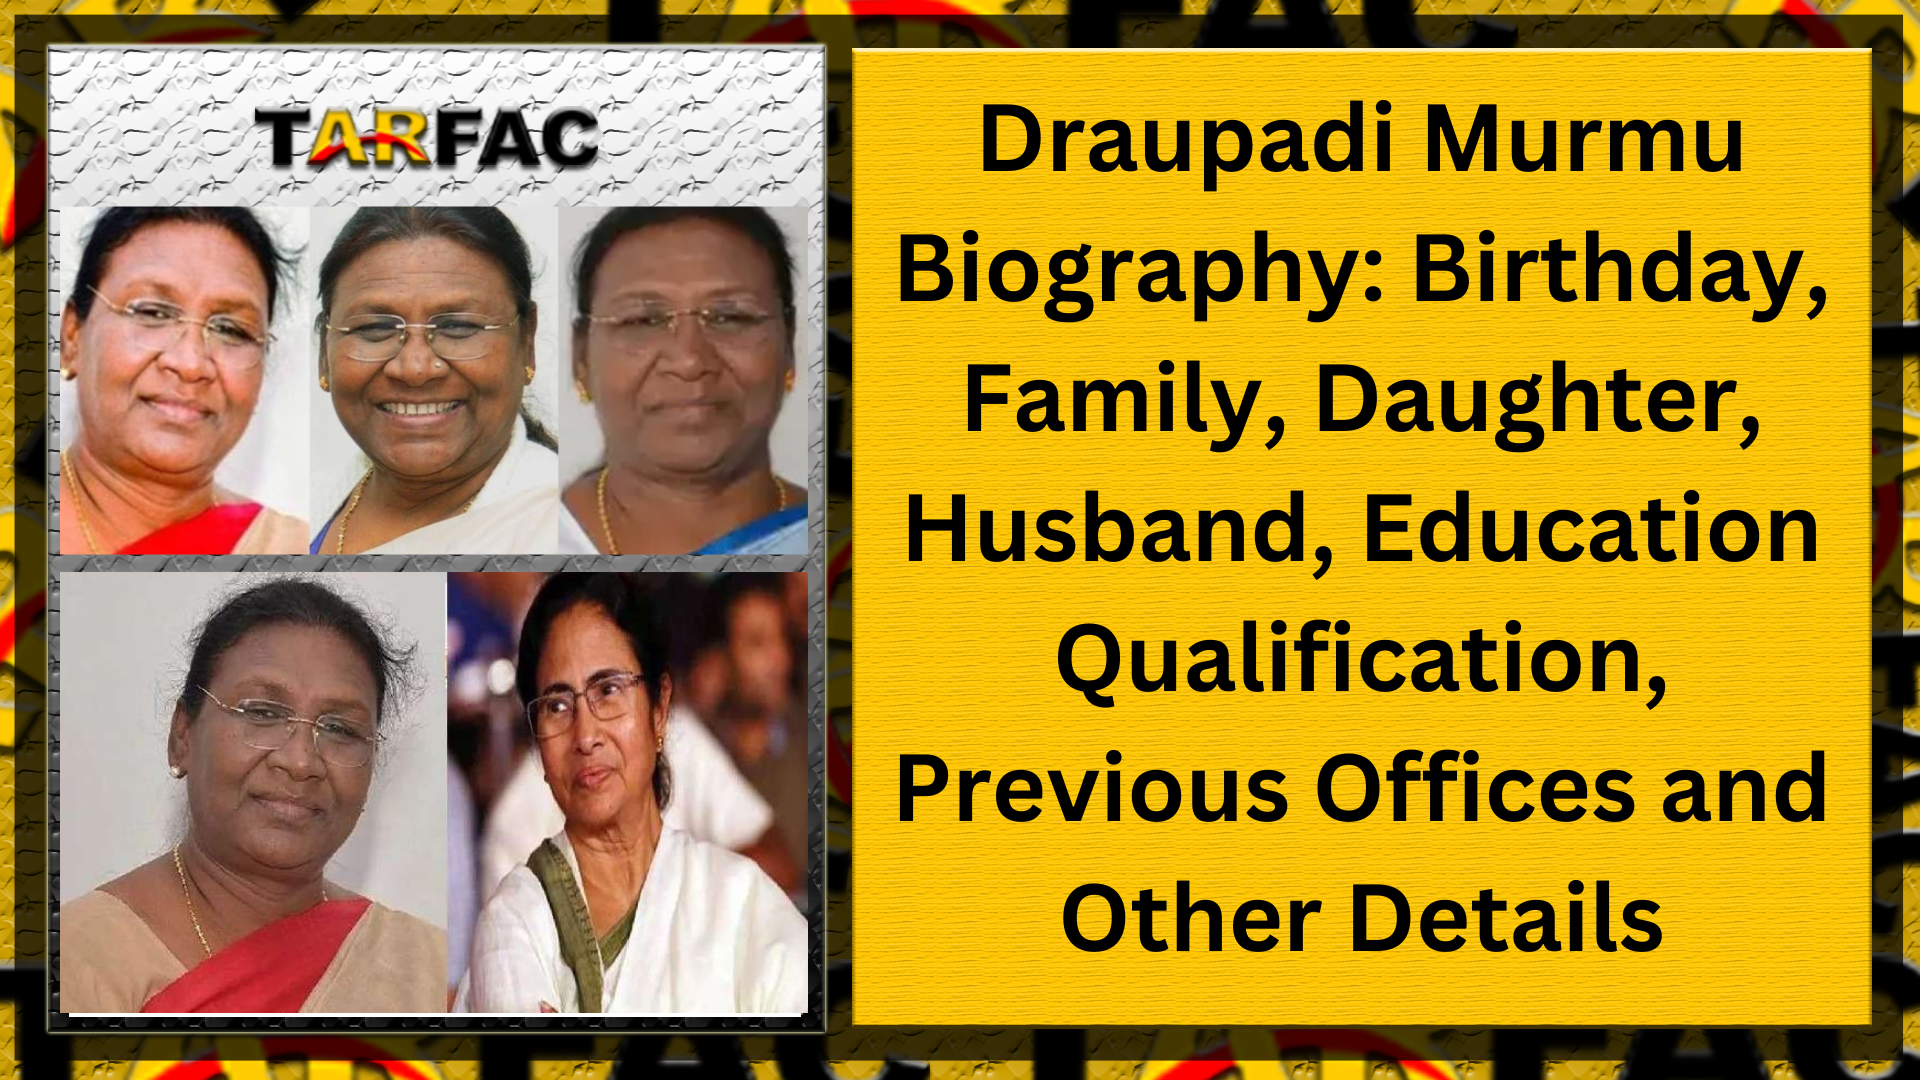 You are currently viewing Draupadi Murmu Biography Birthday, Family, Daughter, Husband, Education Qualification, Previous Offices and Other Details